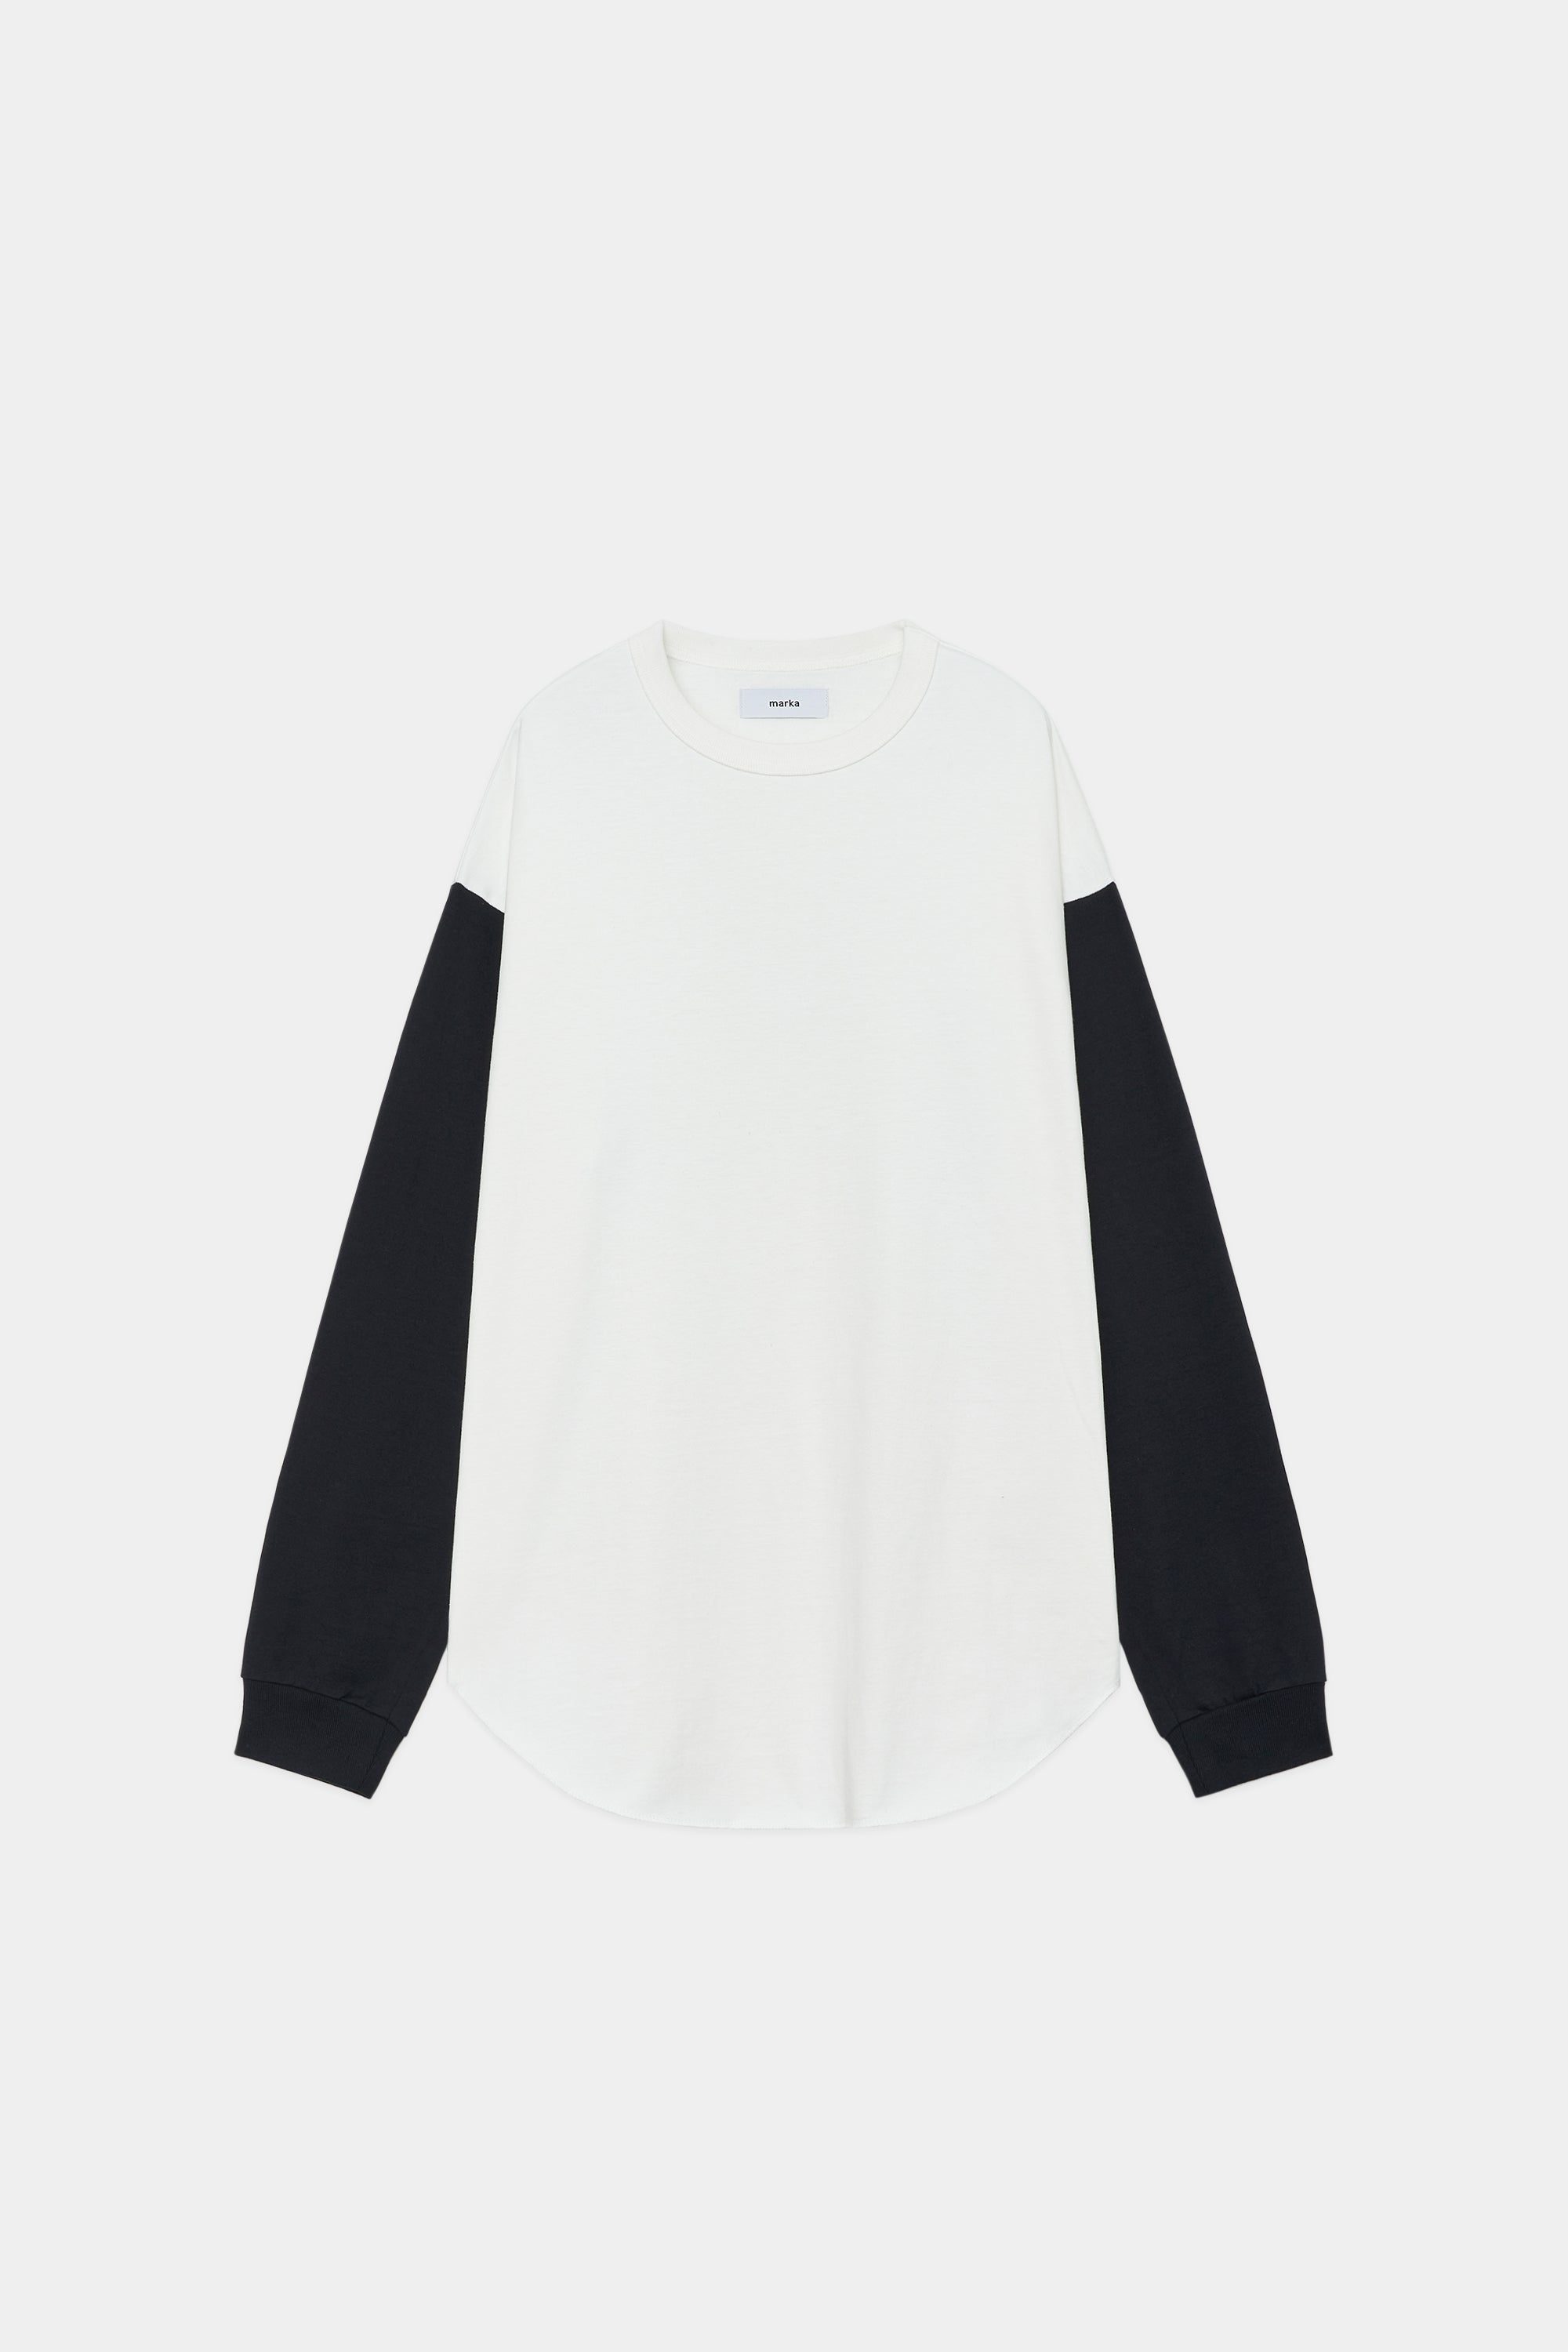 14/-  RECYCLE SUVIN ORGANIC COTTON KNIT BASE BALL TEE L/S, White × Black